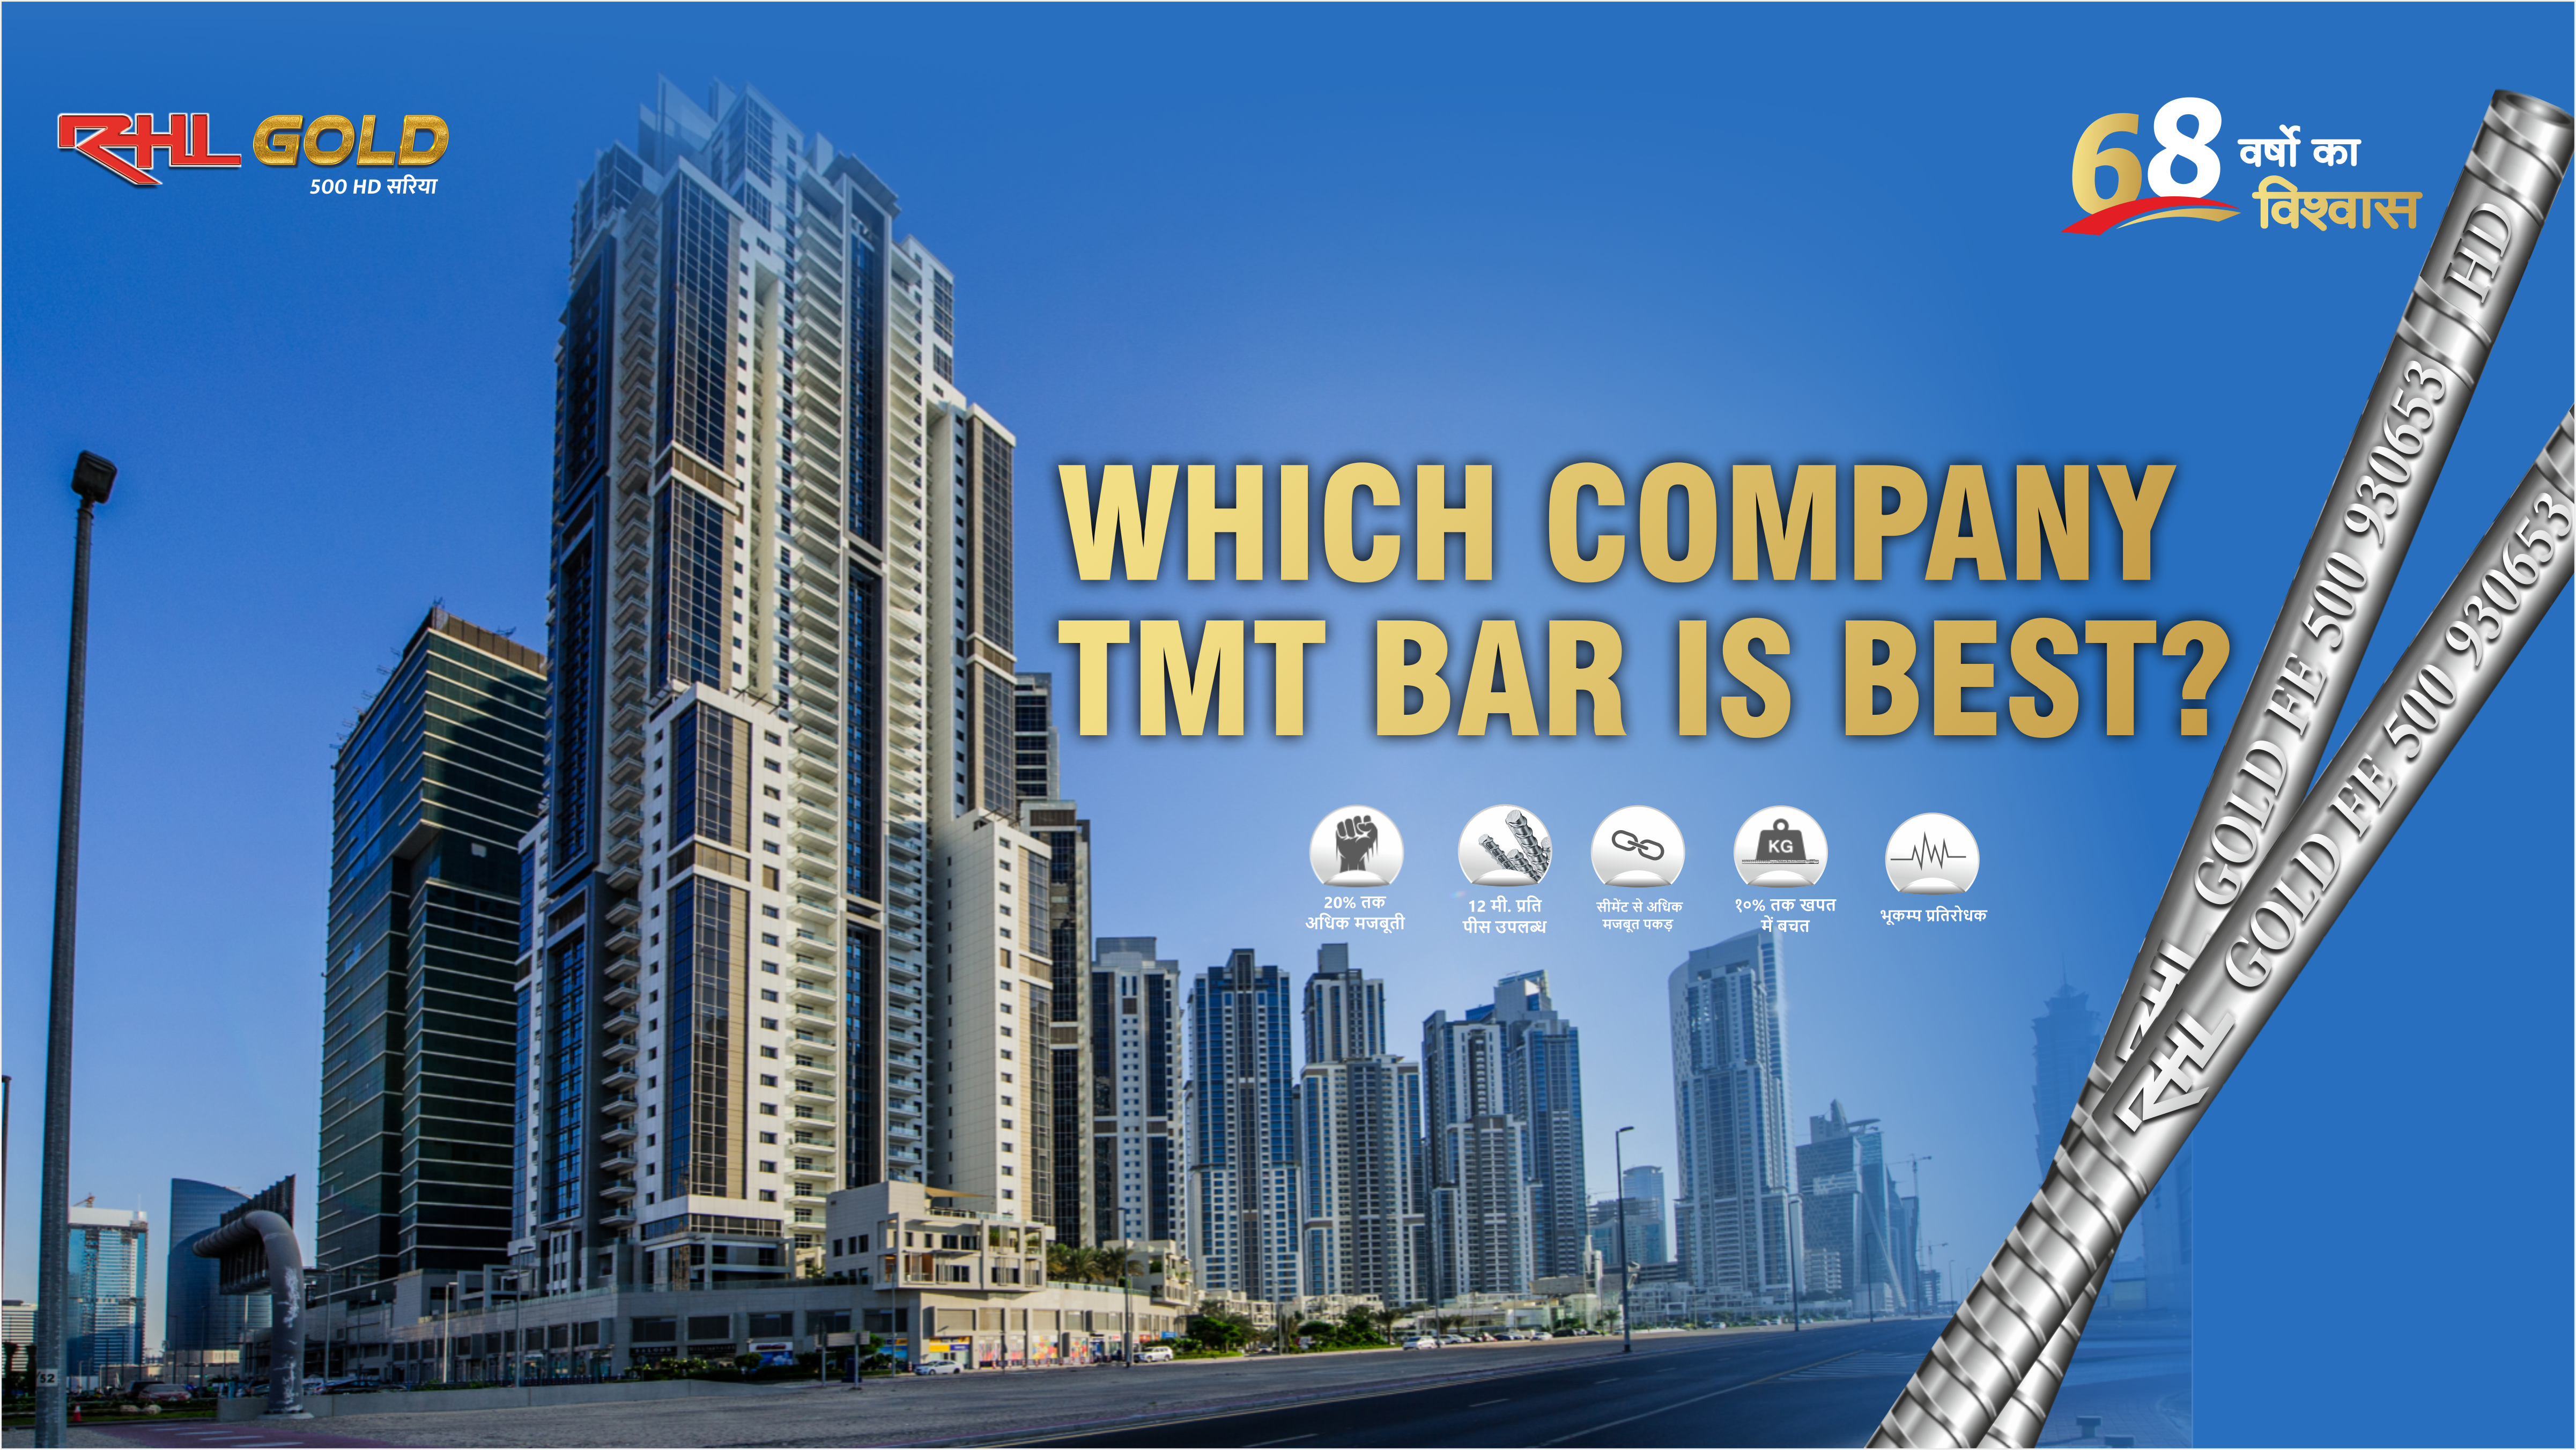 Which company TMT bar is best?